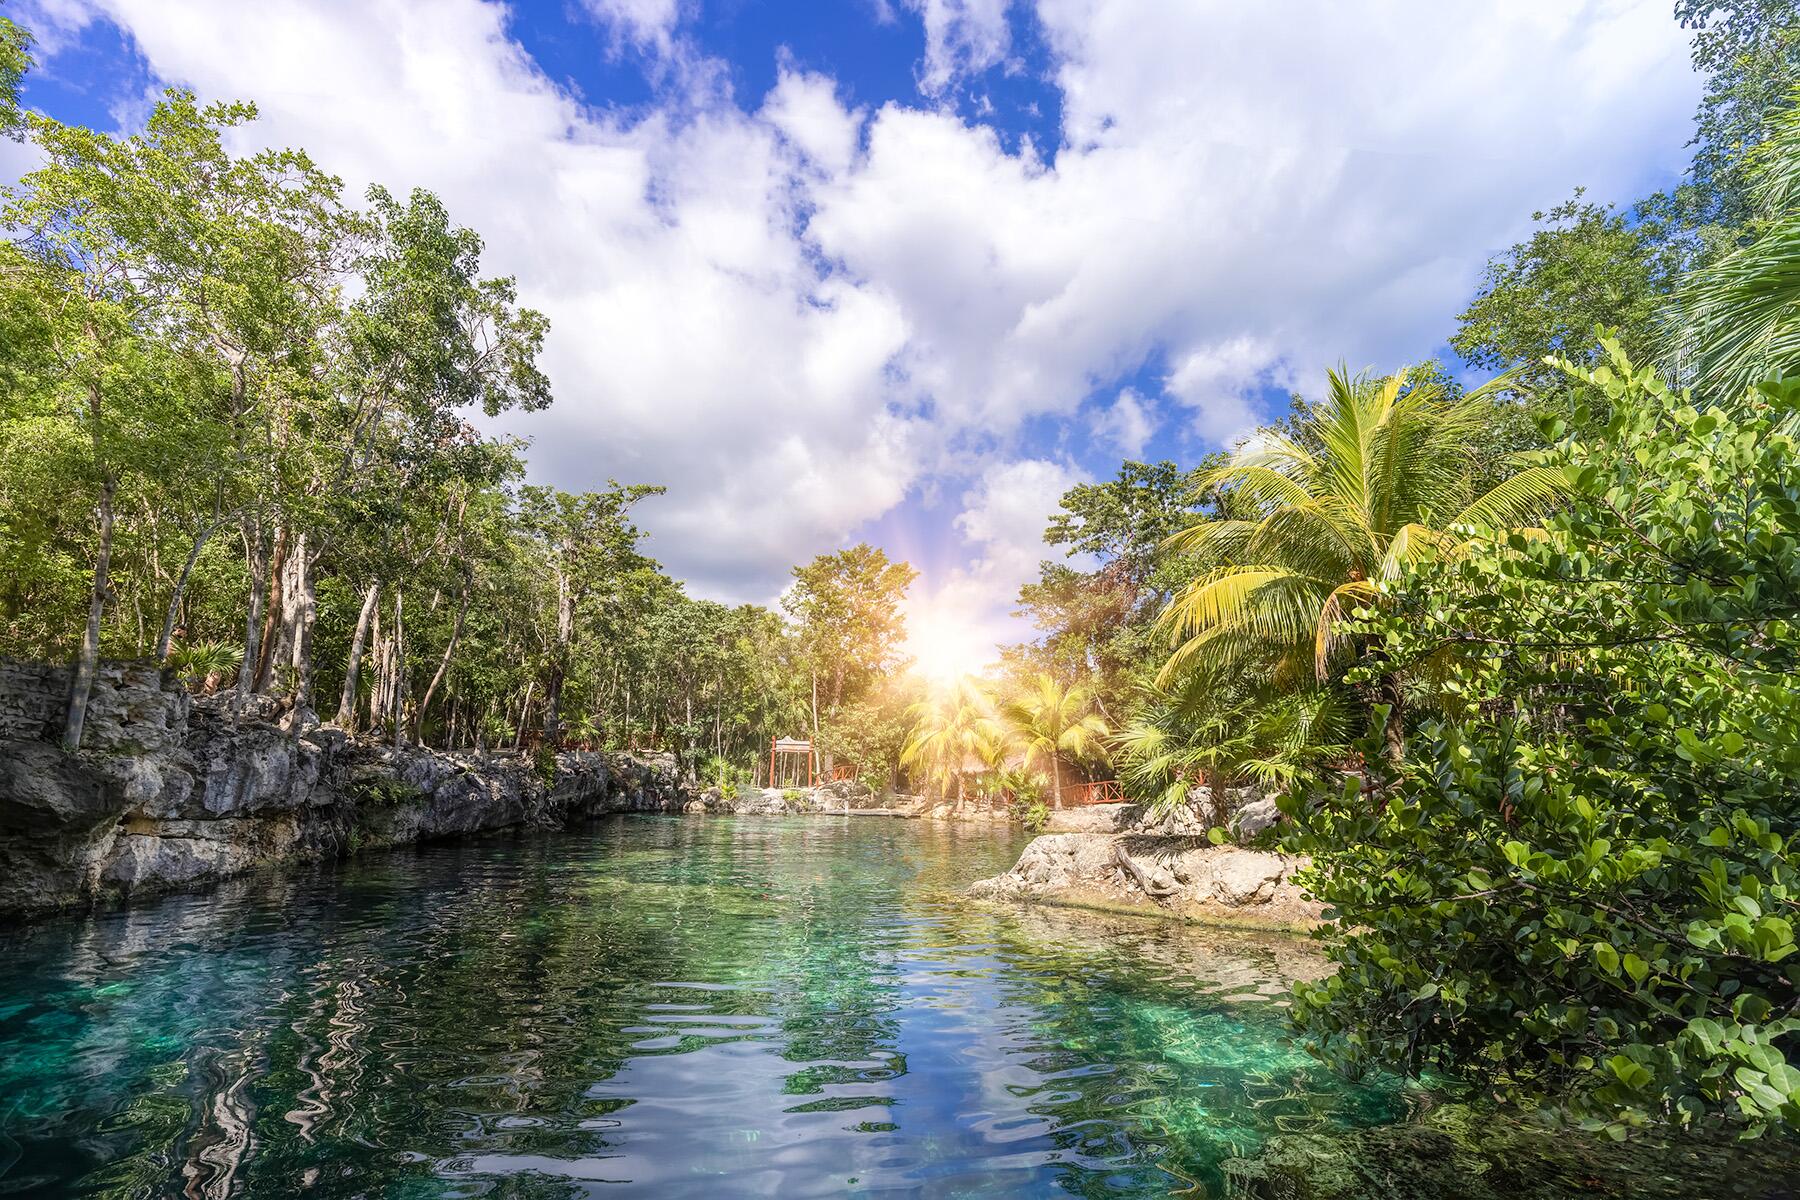 <a href='https://www.fodors.com/world/mexico-and-central-america/mexico/the-riviera-maya/experiences/news/photos/best-cenotes-to-visit-in-riviera-maya#'>From &quot;The 10 Most Magical Cenotes in the Riviera Maya&quot;</a>